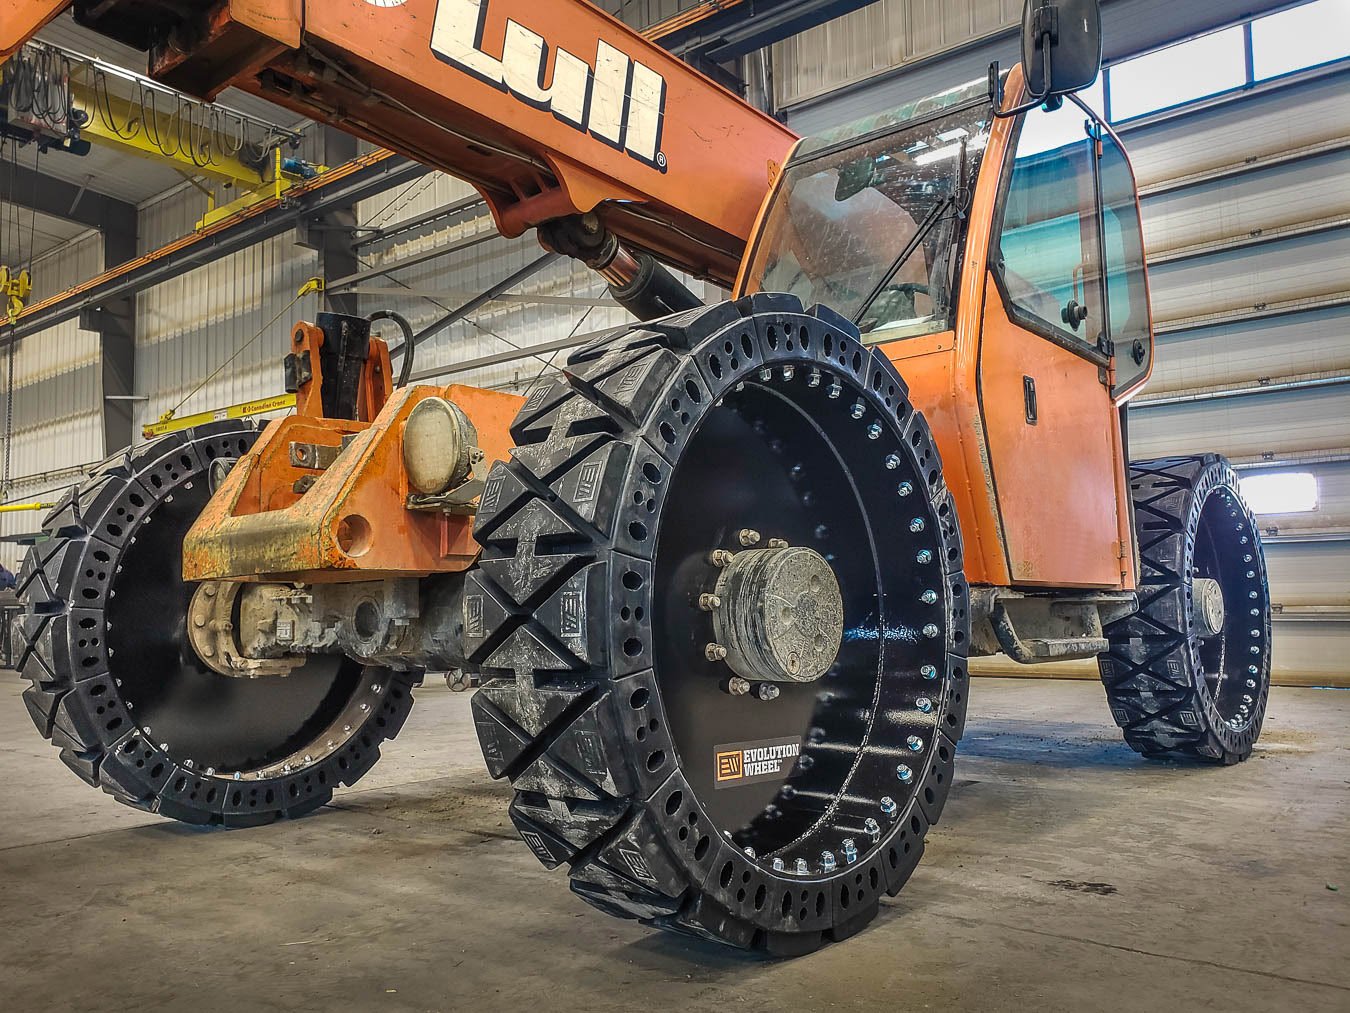 This picture shows our telescopic forklift tires on an orange Lull telehandler